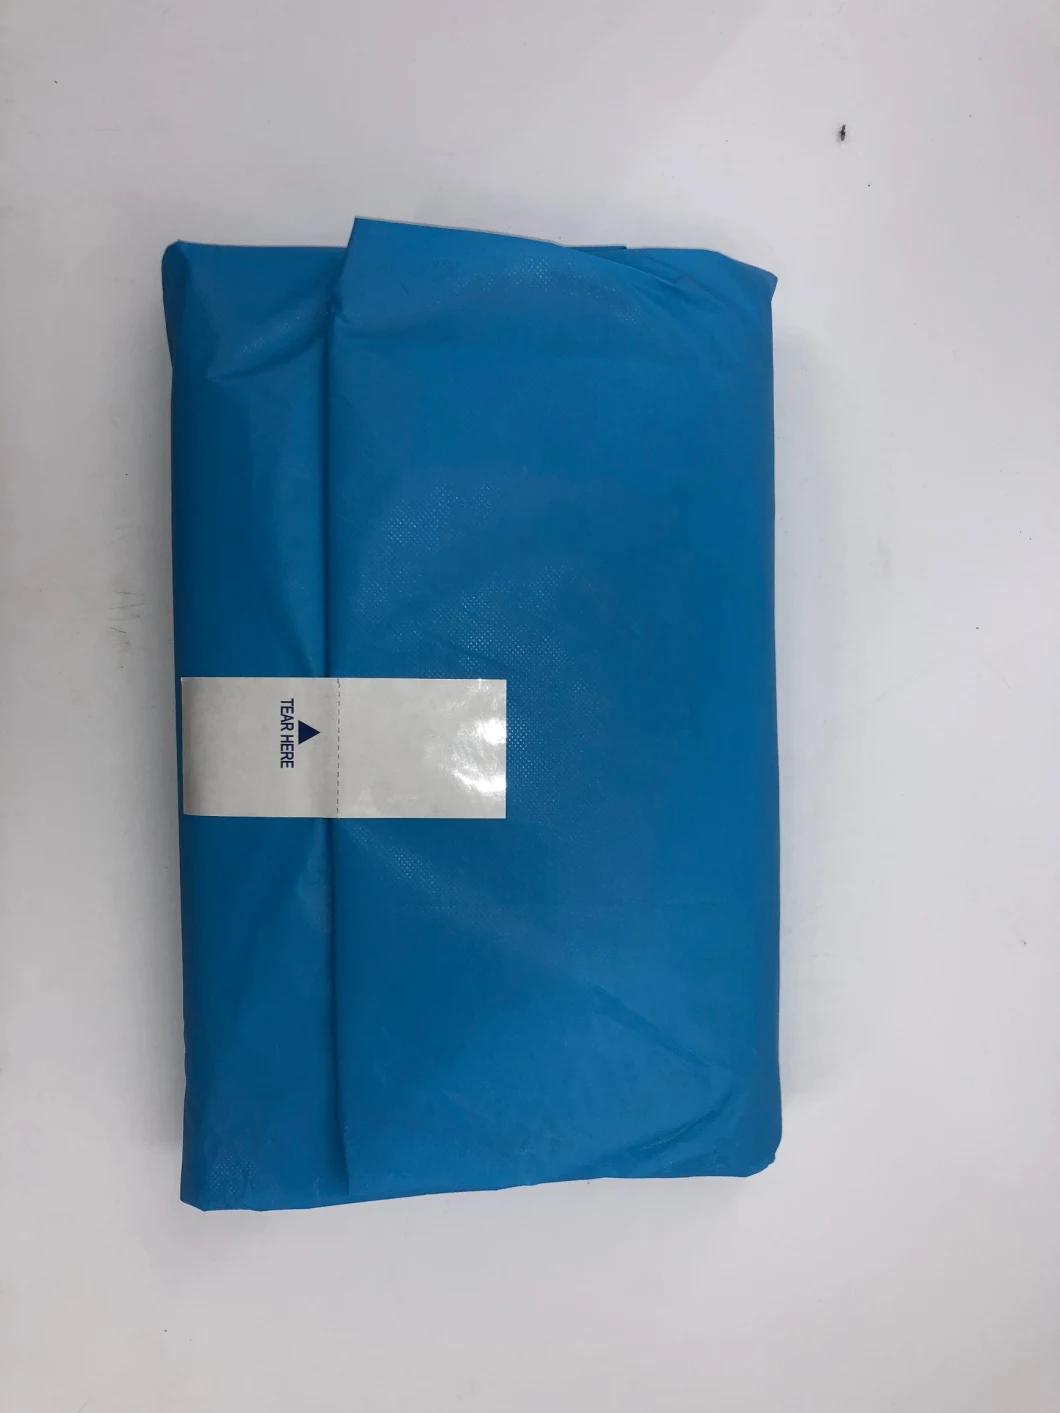 Factory Supply Sterile Surgical Delivery Pack Natural Labour Pack Delivery Drape Set Kit Ob Pack